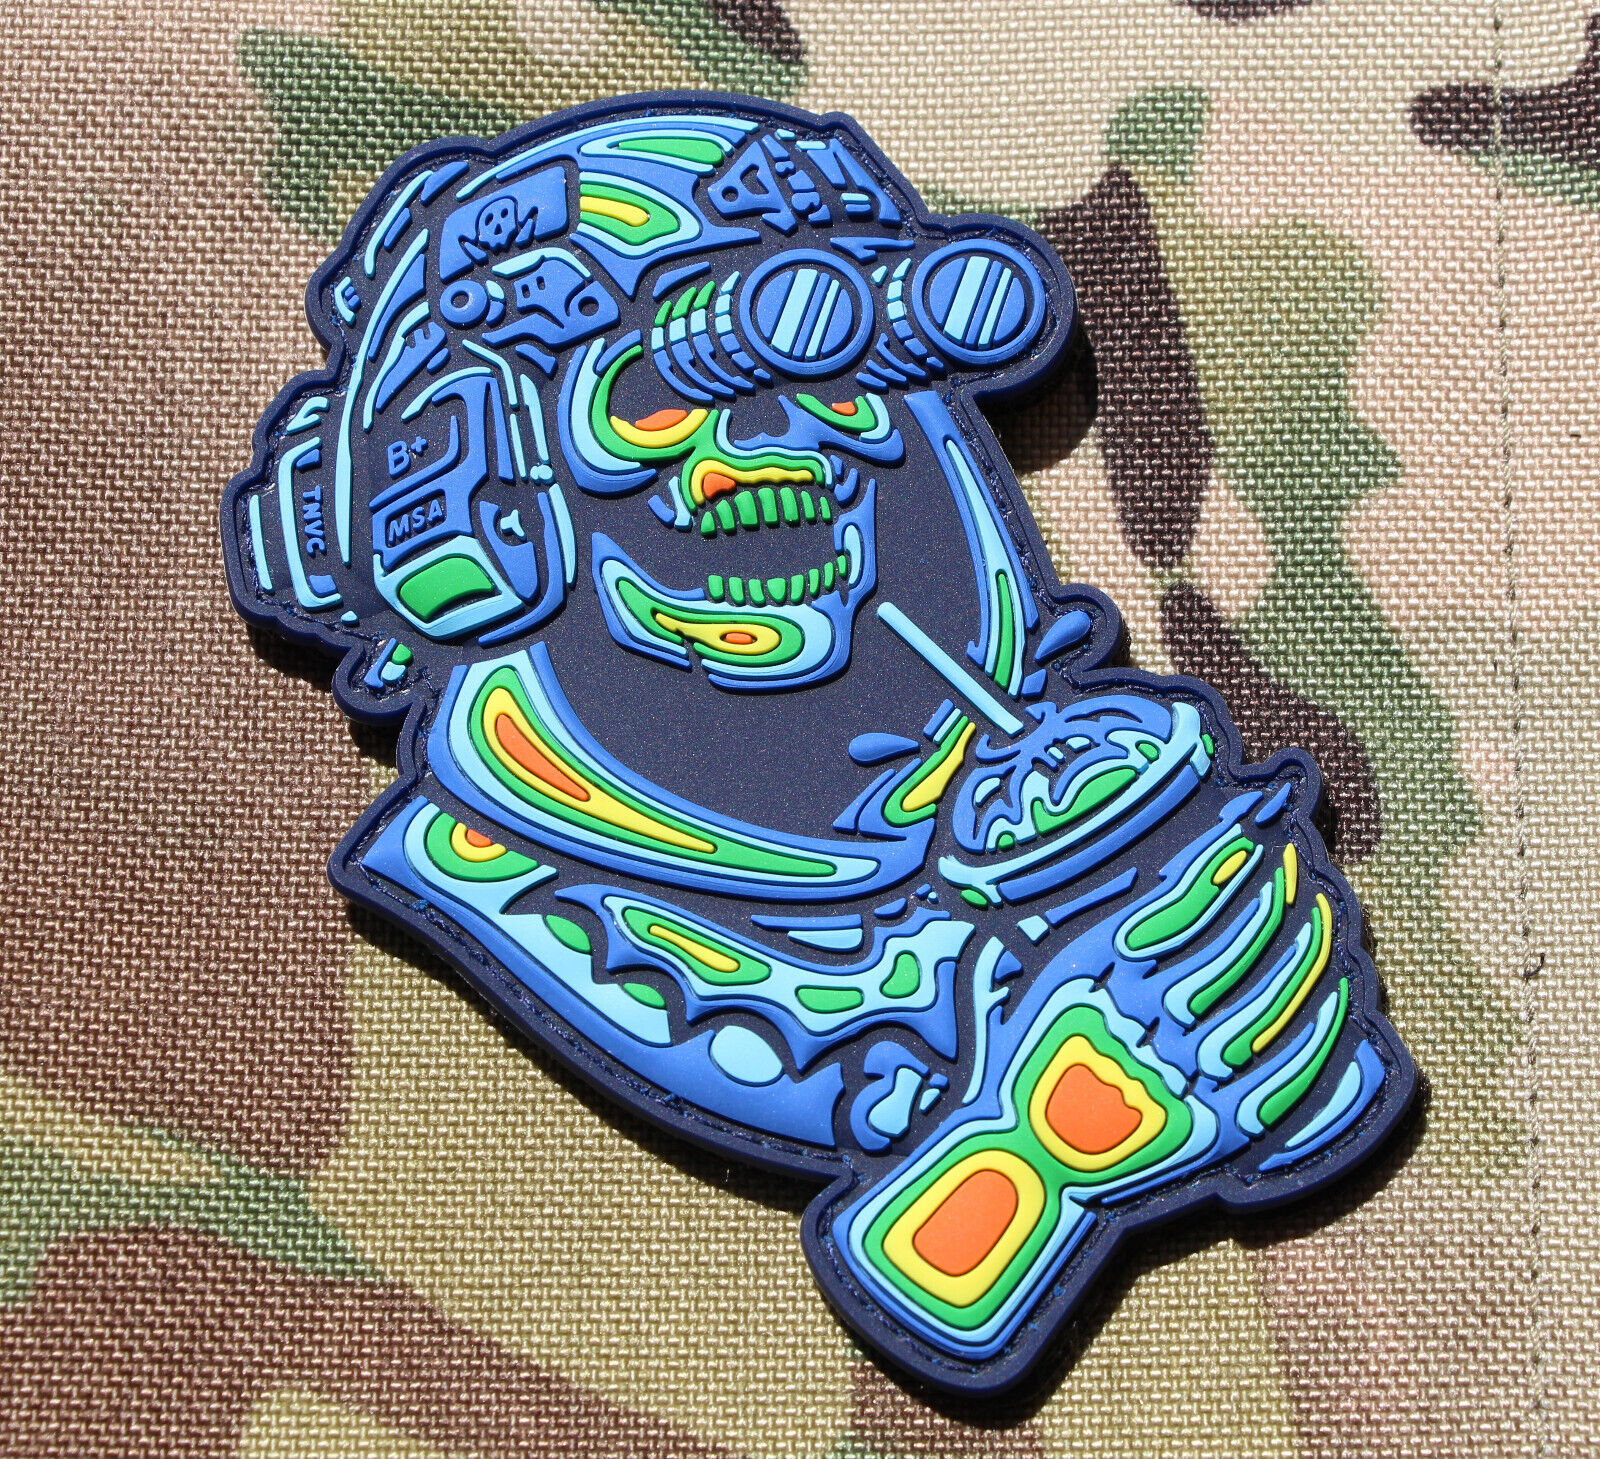 Wasteland Kooks - You S.O.B. - Thermal MISFORTUNES PVC Patch Limited - NEW